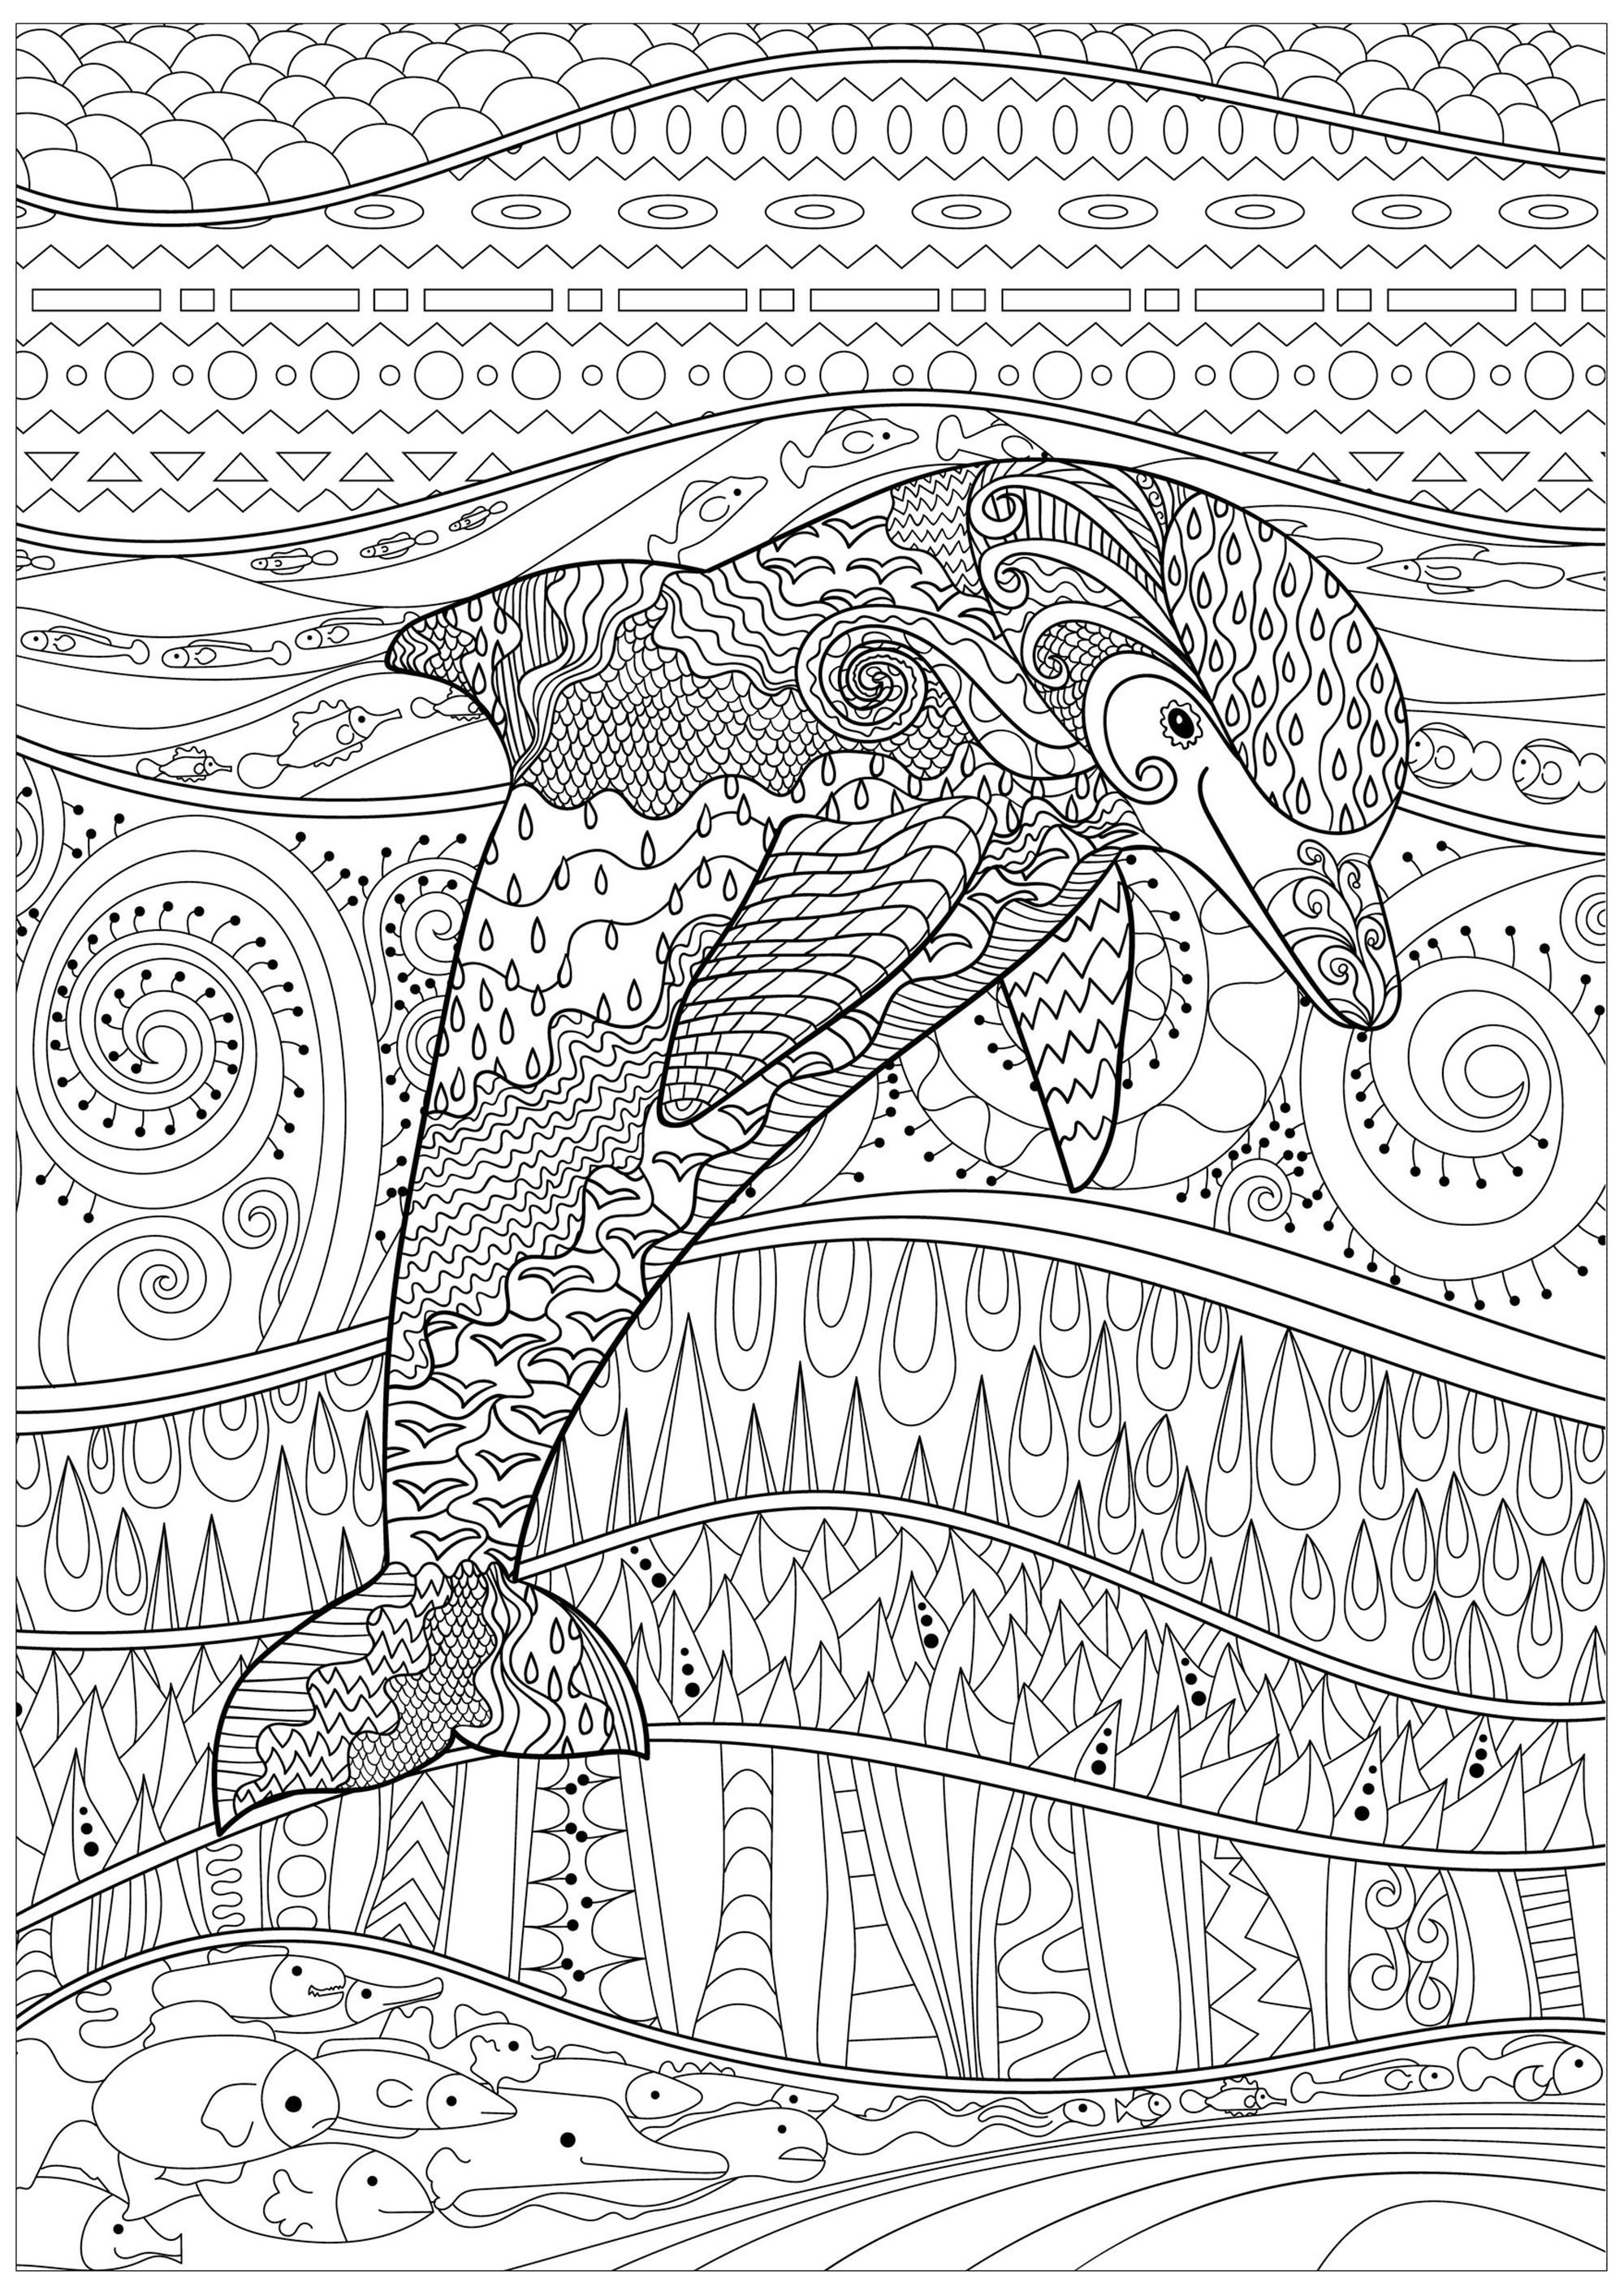 Radiant dolphin - Dolphins Adult Coloring Pages